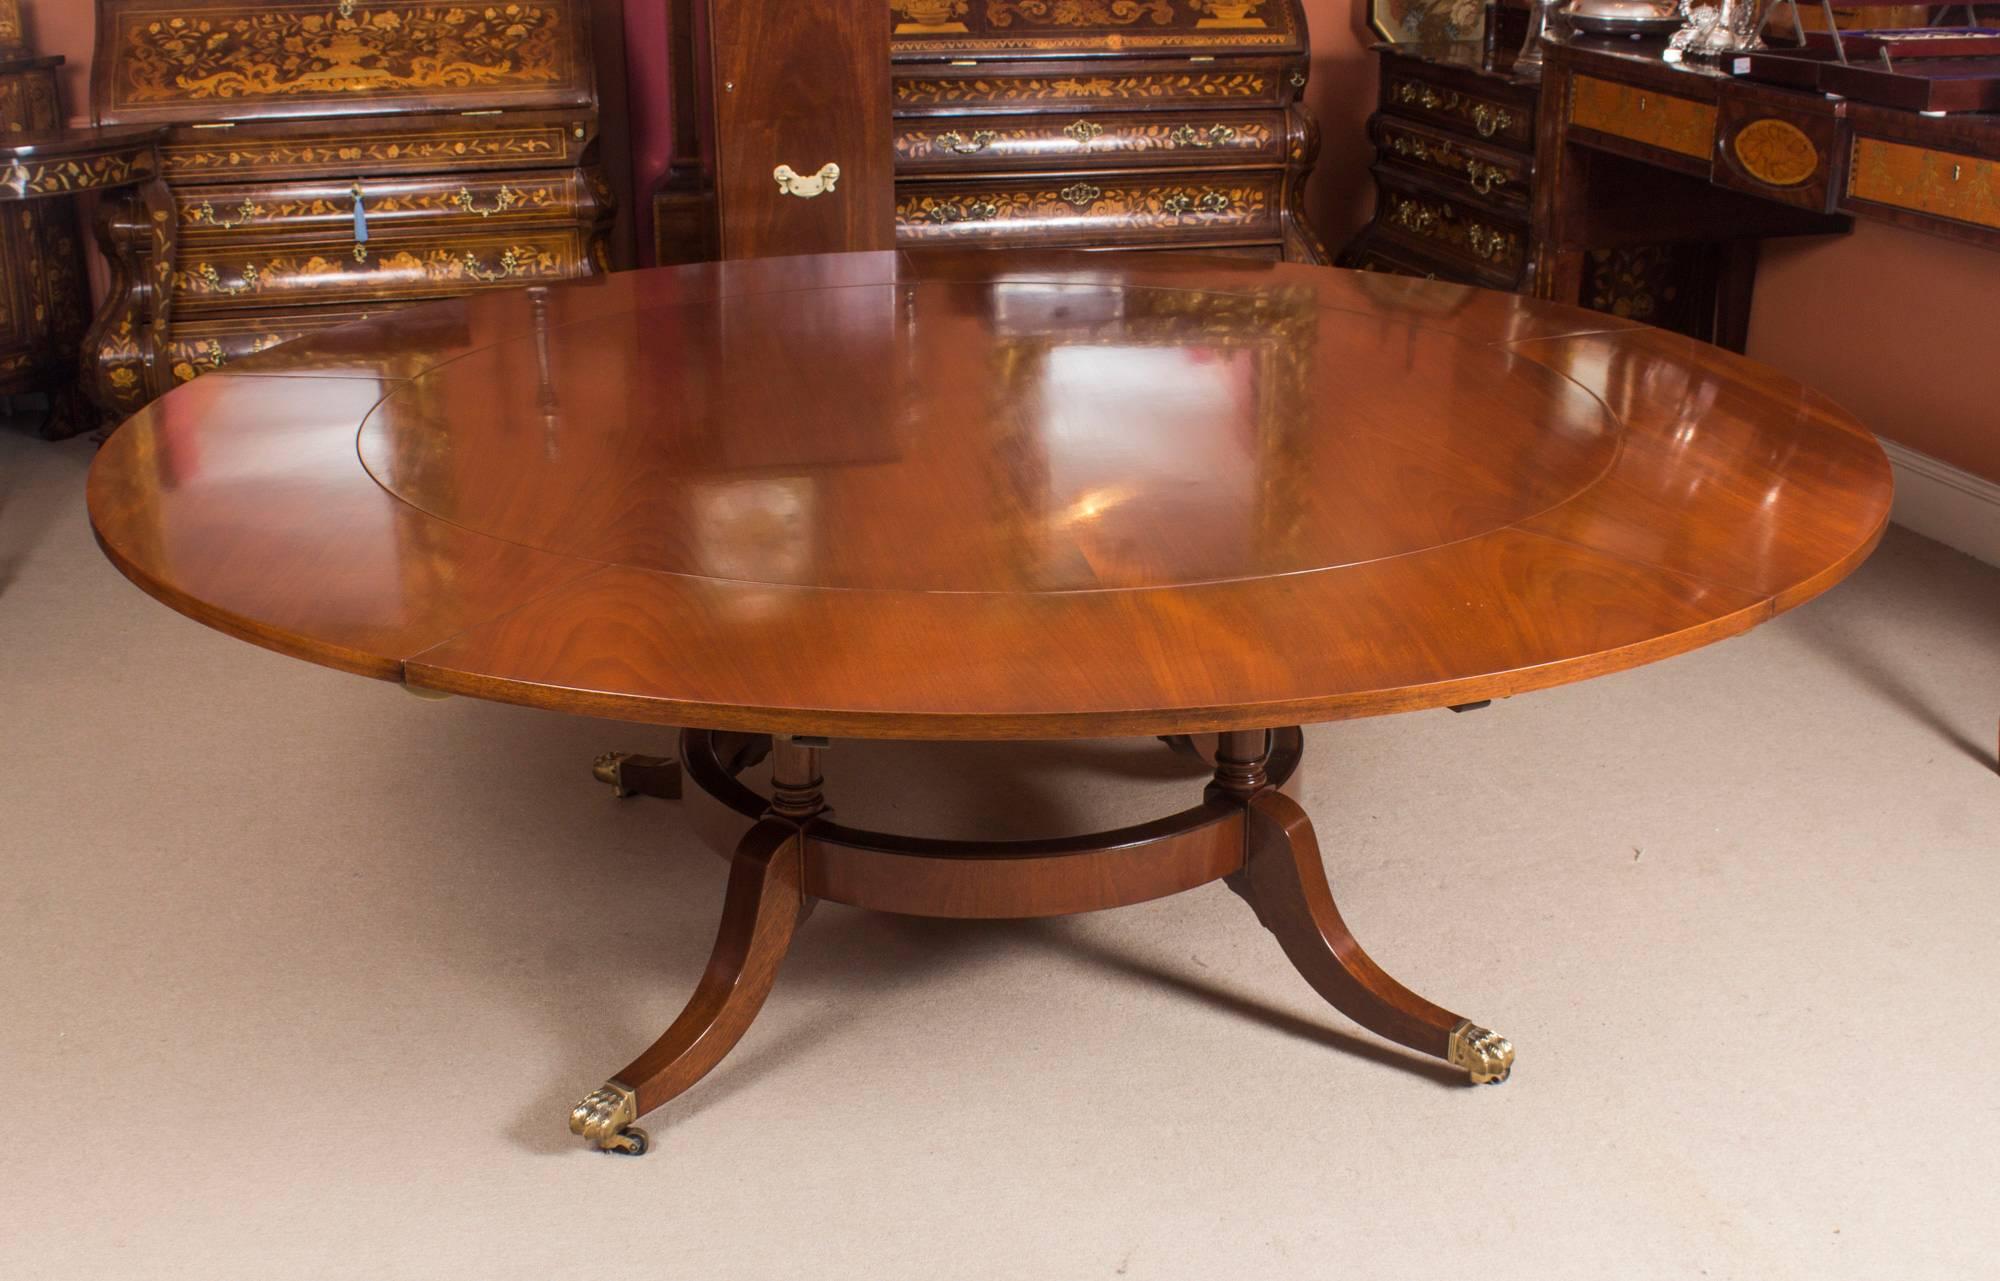 Regency Revival Vintage Mahogany Jupe Dining Table, Leaf Cabinet and Ten Chairs